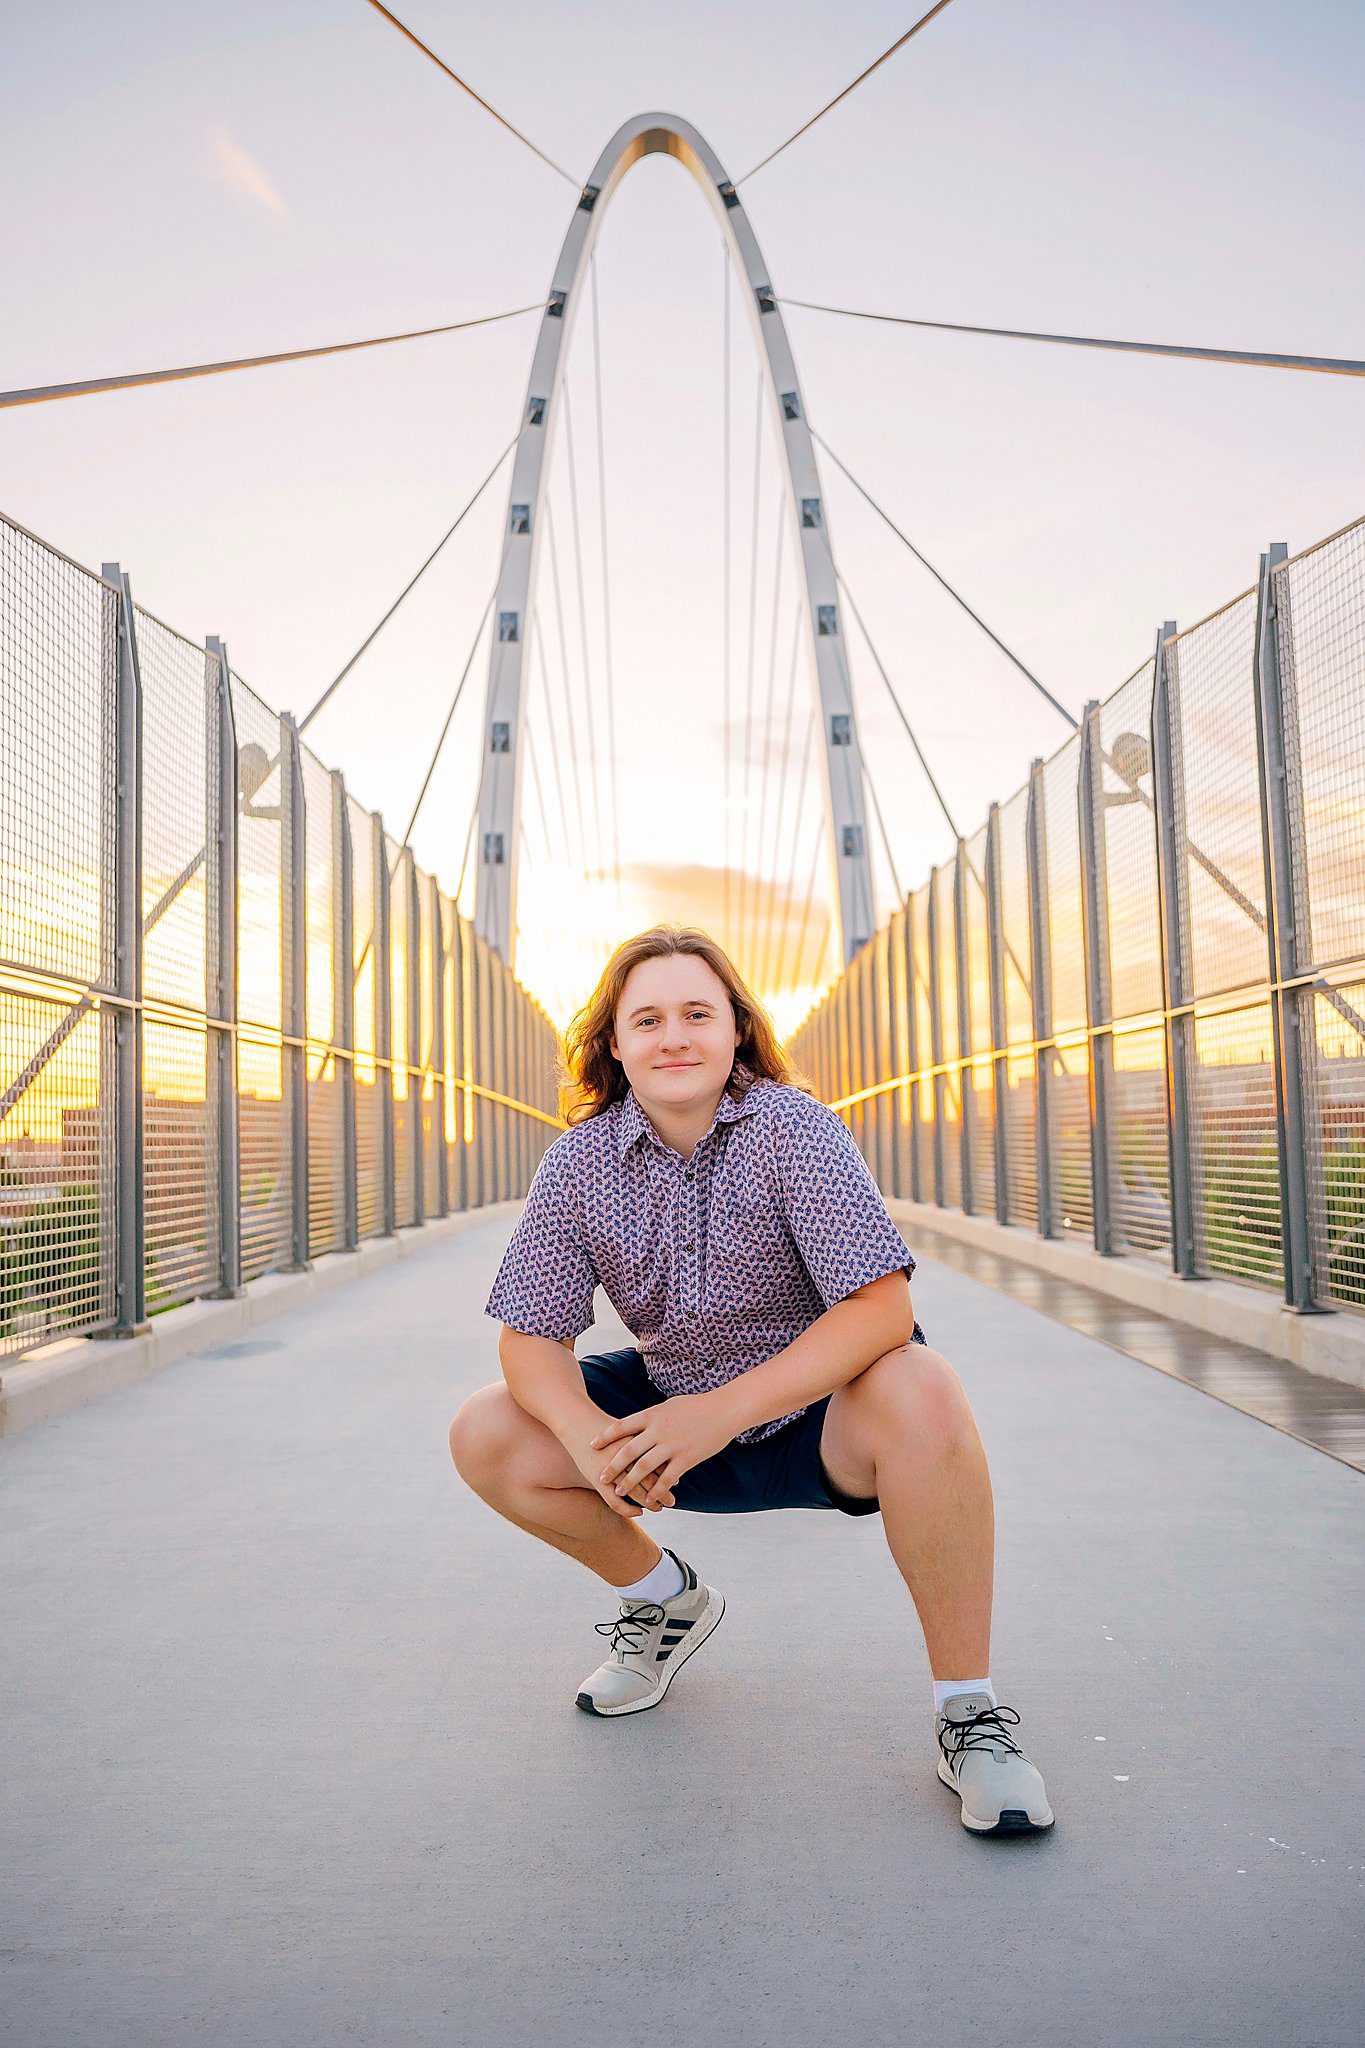 A high school senior with long hair and a button-down shirt and shorts squats in the center of a pedestrian suspension bridge colleges in spokane